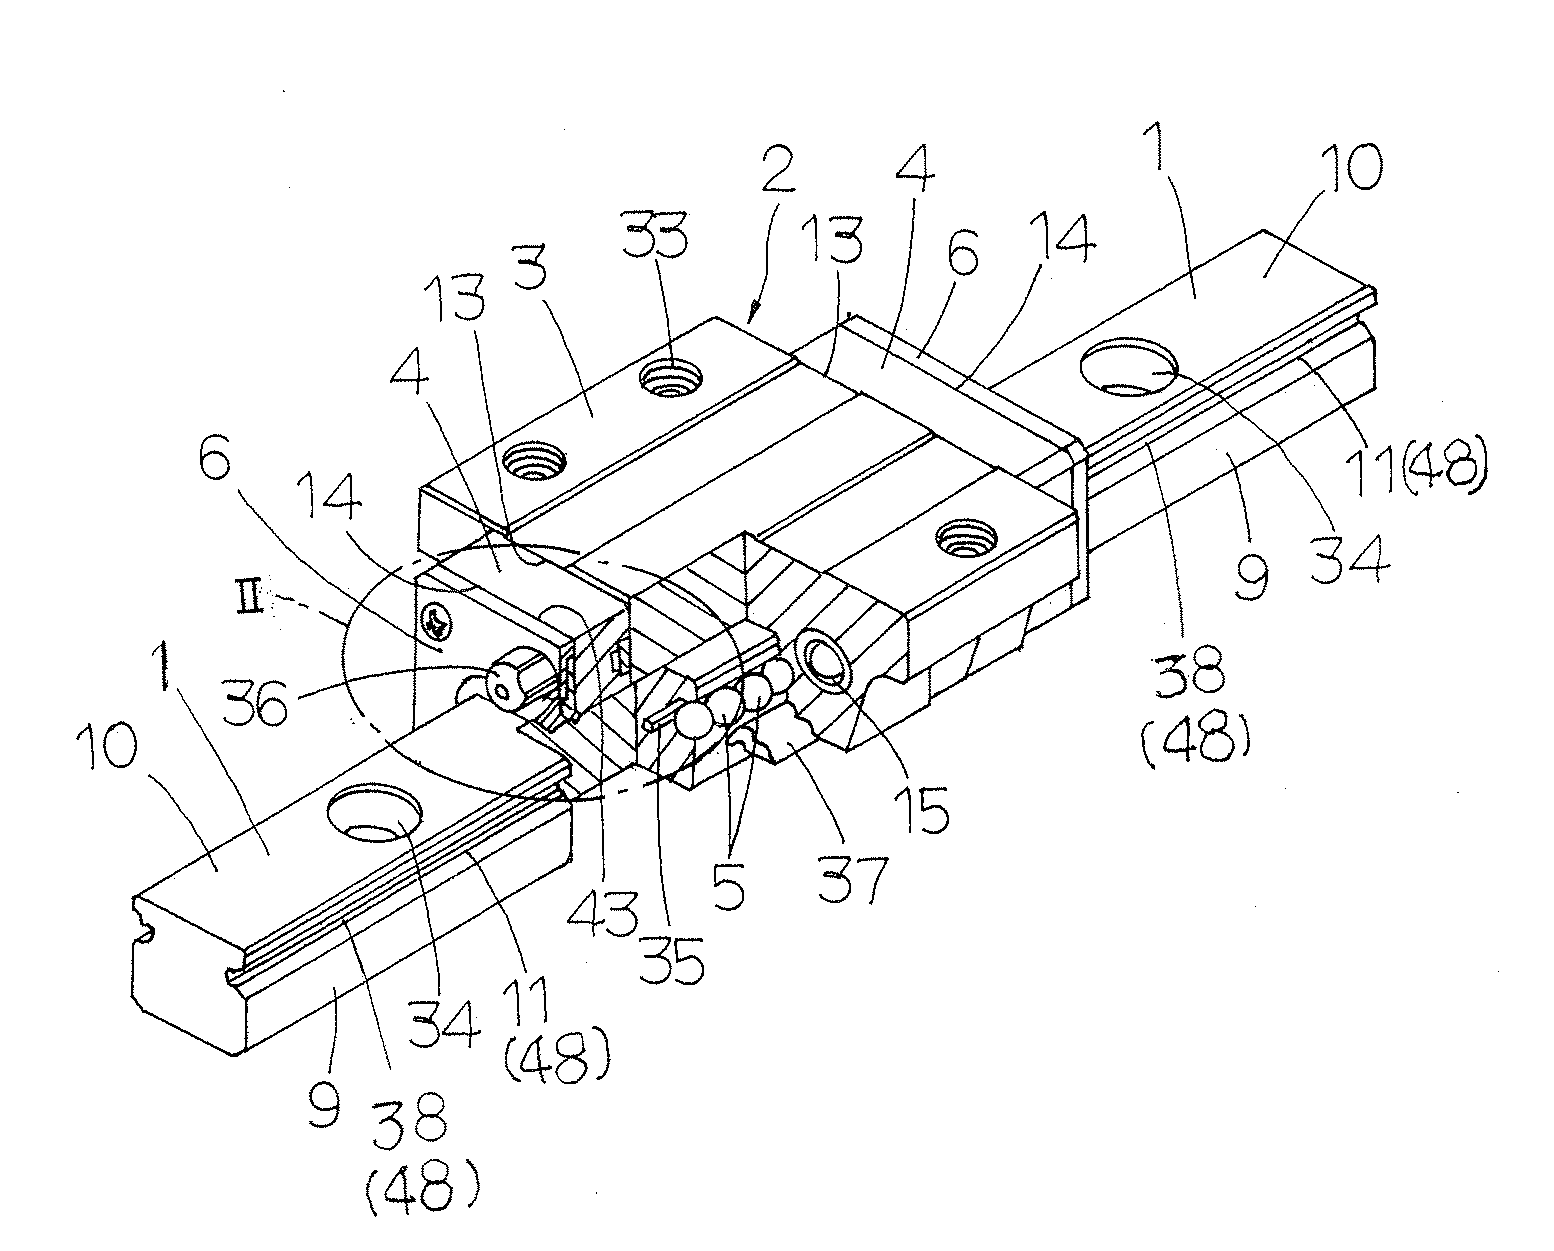 Linear motion guide system unit